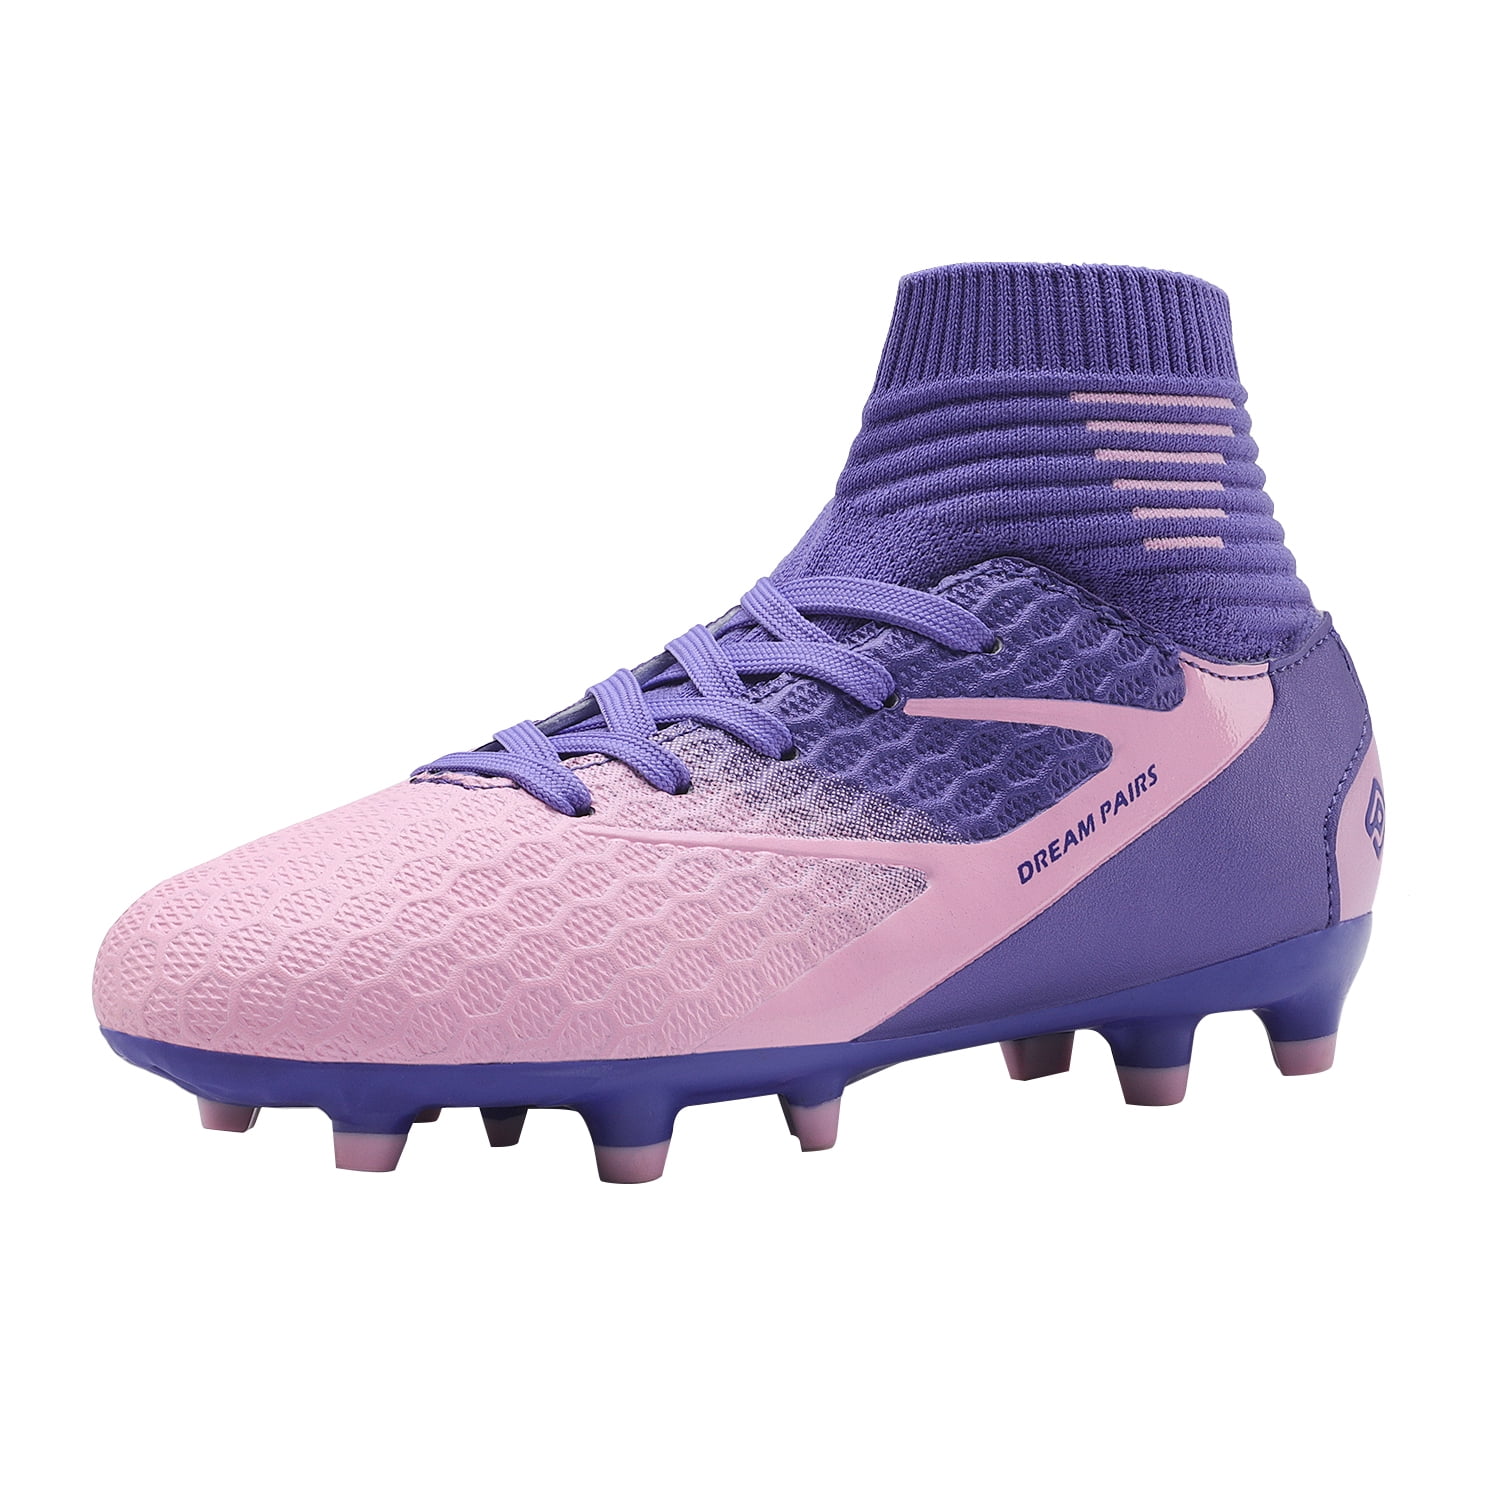 LEOCI Durable Soccer Shoes Kids Football Boots Boy and Girl Anti-Slip Child Light Soccer Cleats 